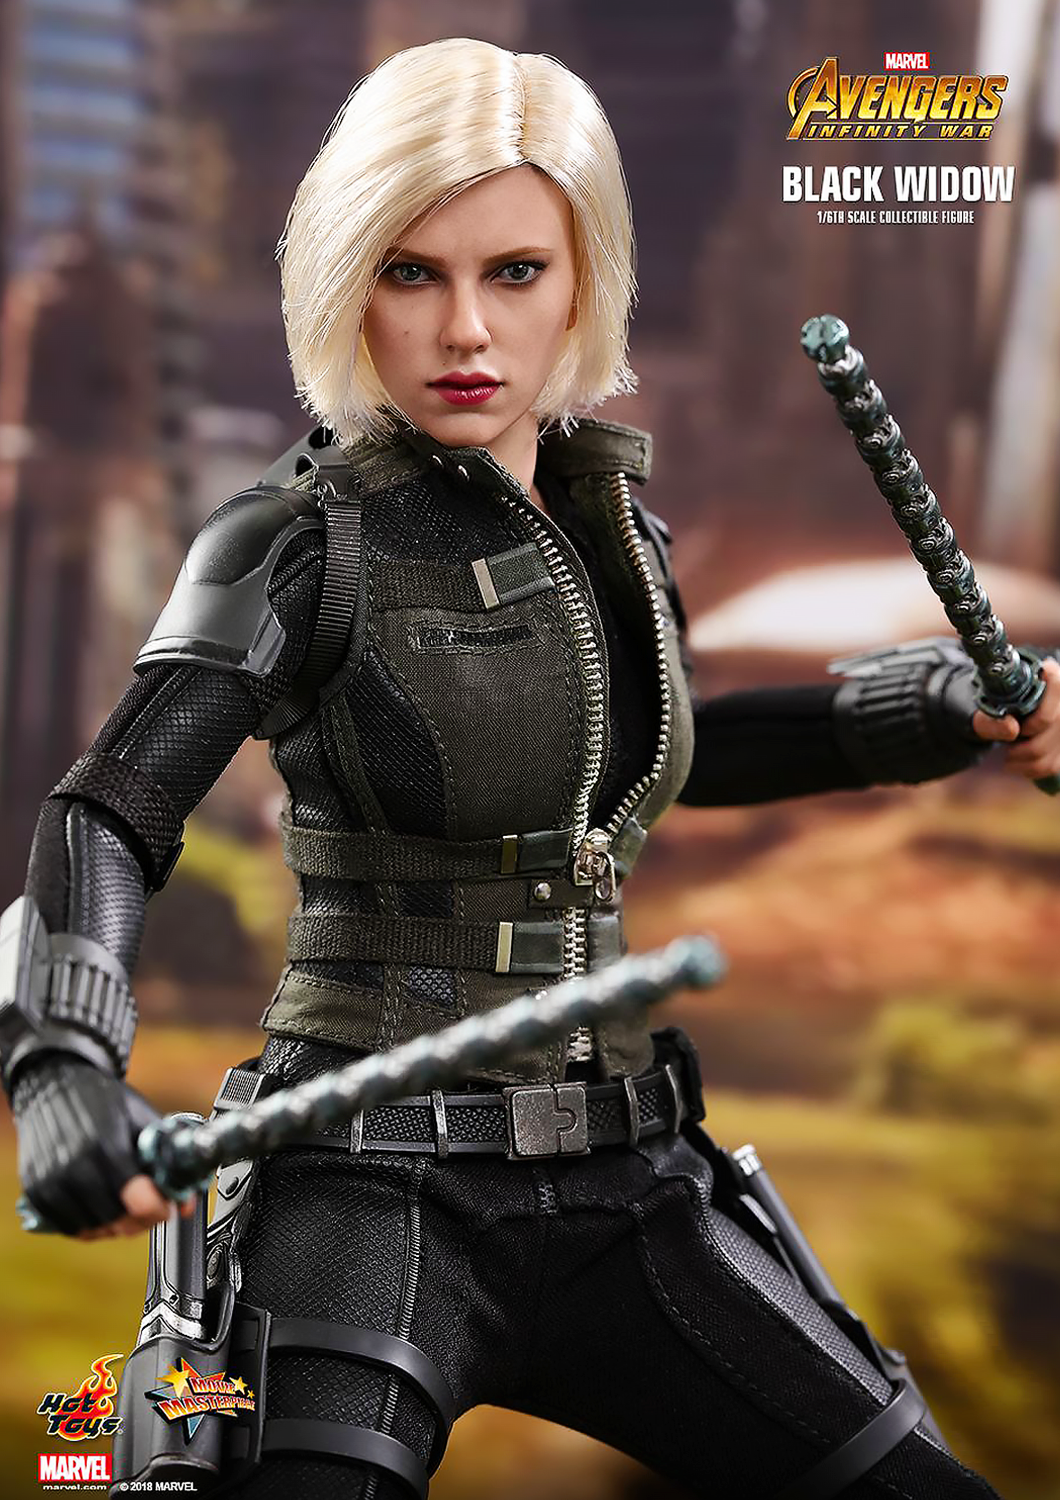 HOT TOYS AVENGERS MARVEL : INFINITY WAR BLACK WIDOW 1/6TH SCALE COLLECTIBLE FIGURE - MMS460 - Anotoys Collectibles